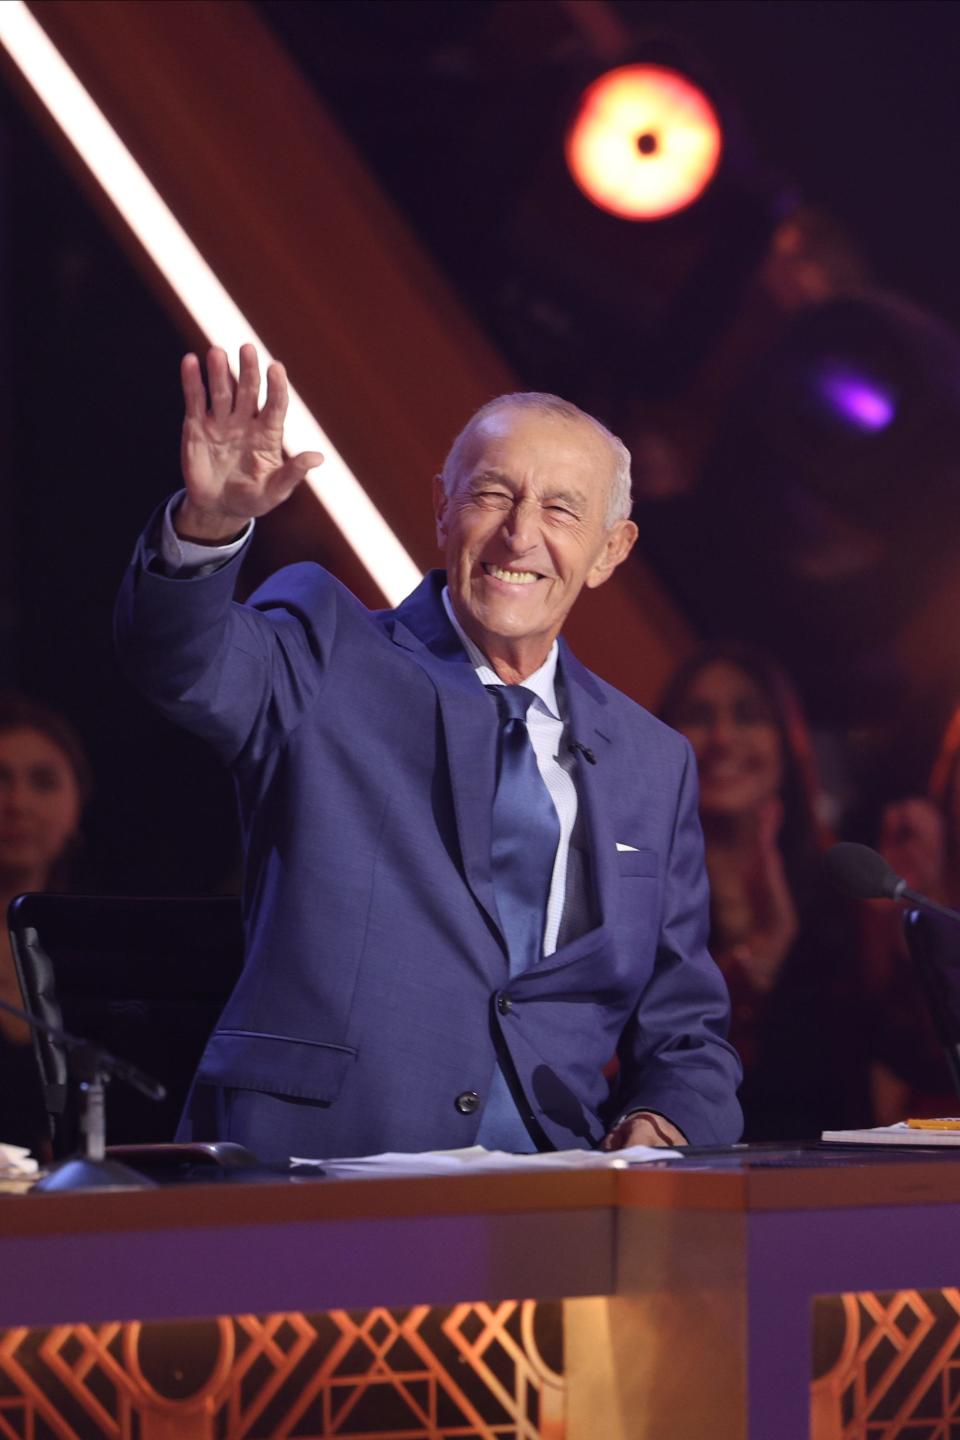 Former "Dancing with the Stars" head judge Len Goodman died in April at 78 years old.